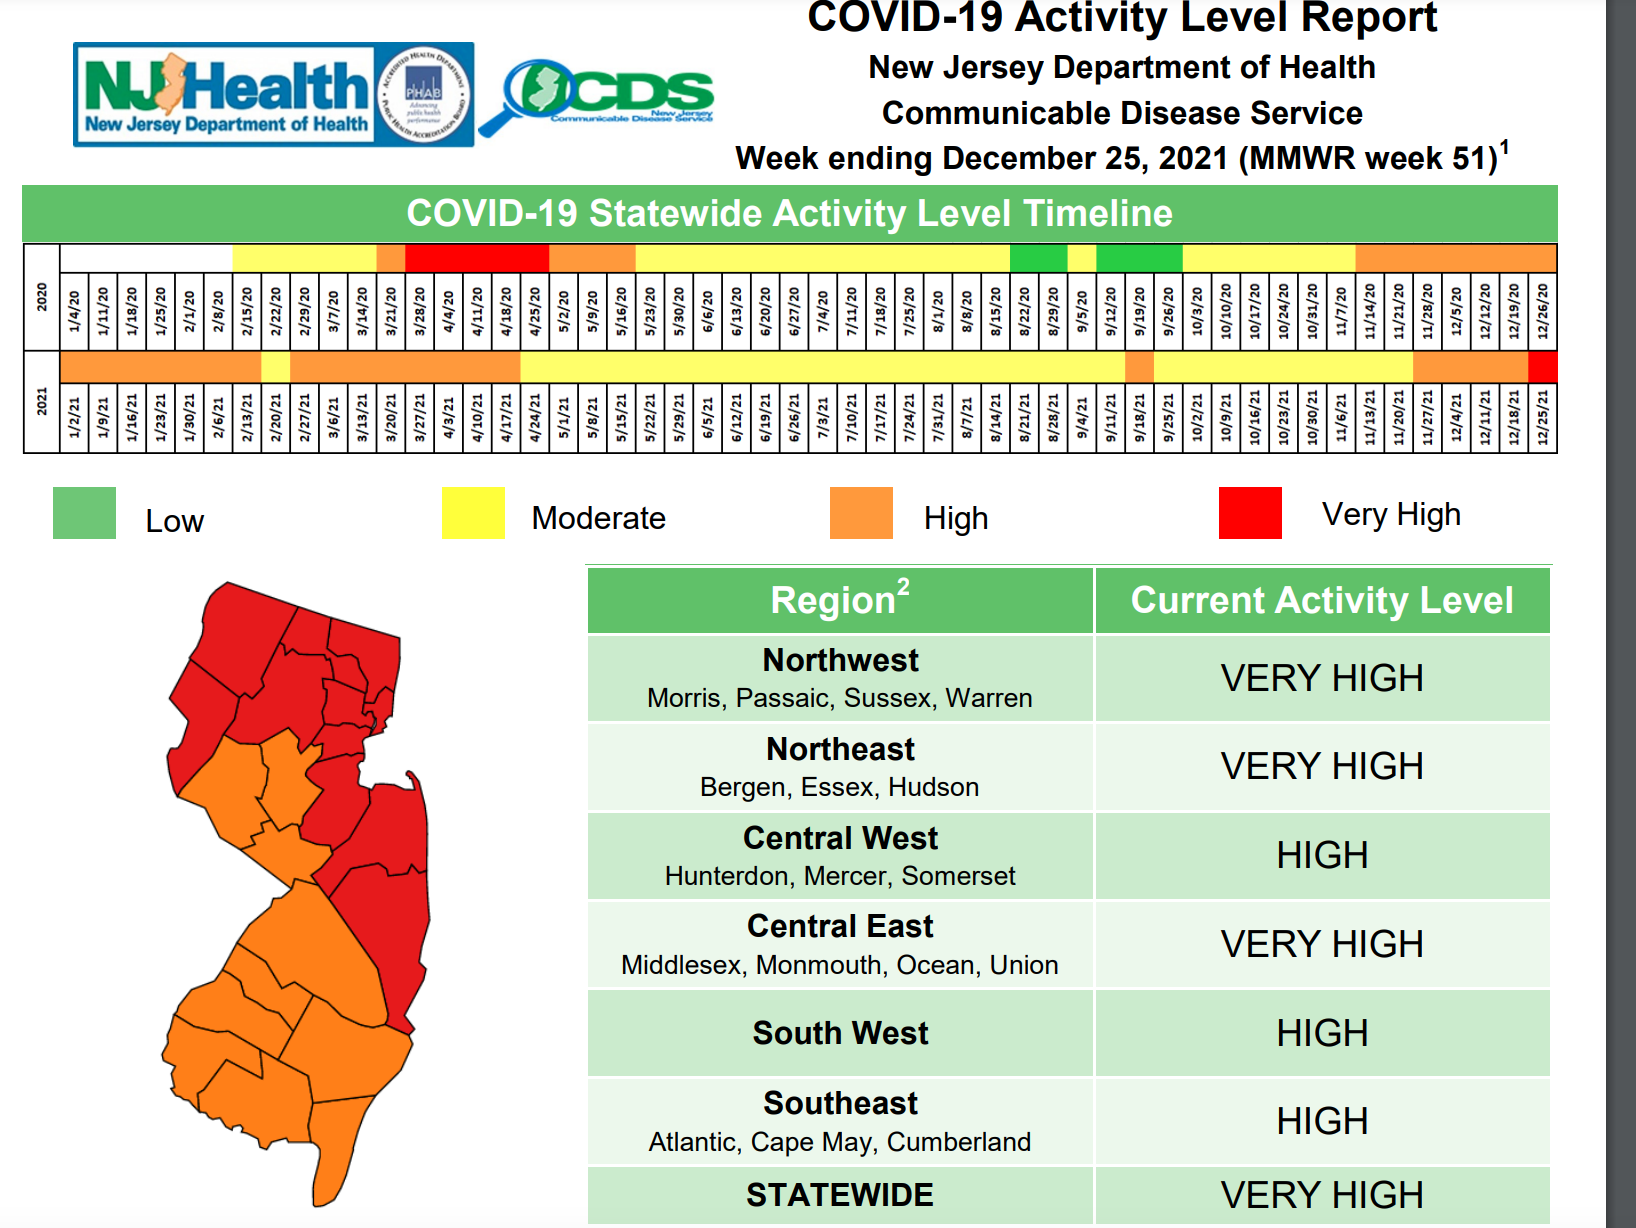 COVID-19 Safety at Malls in Denver Level Red Zones Update